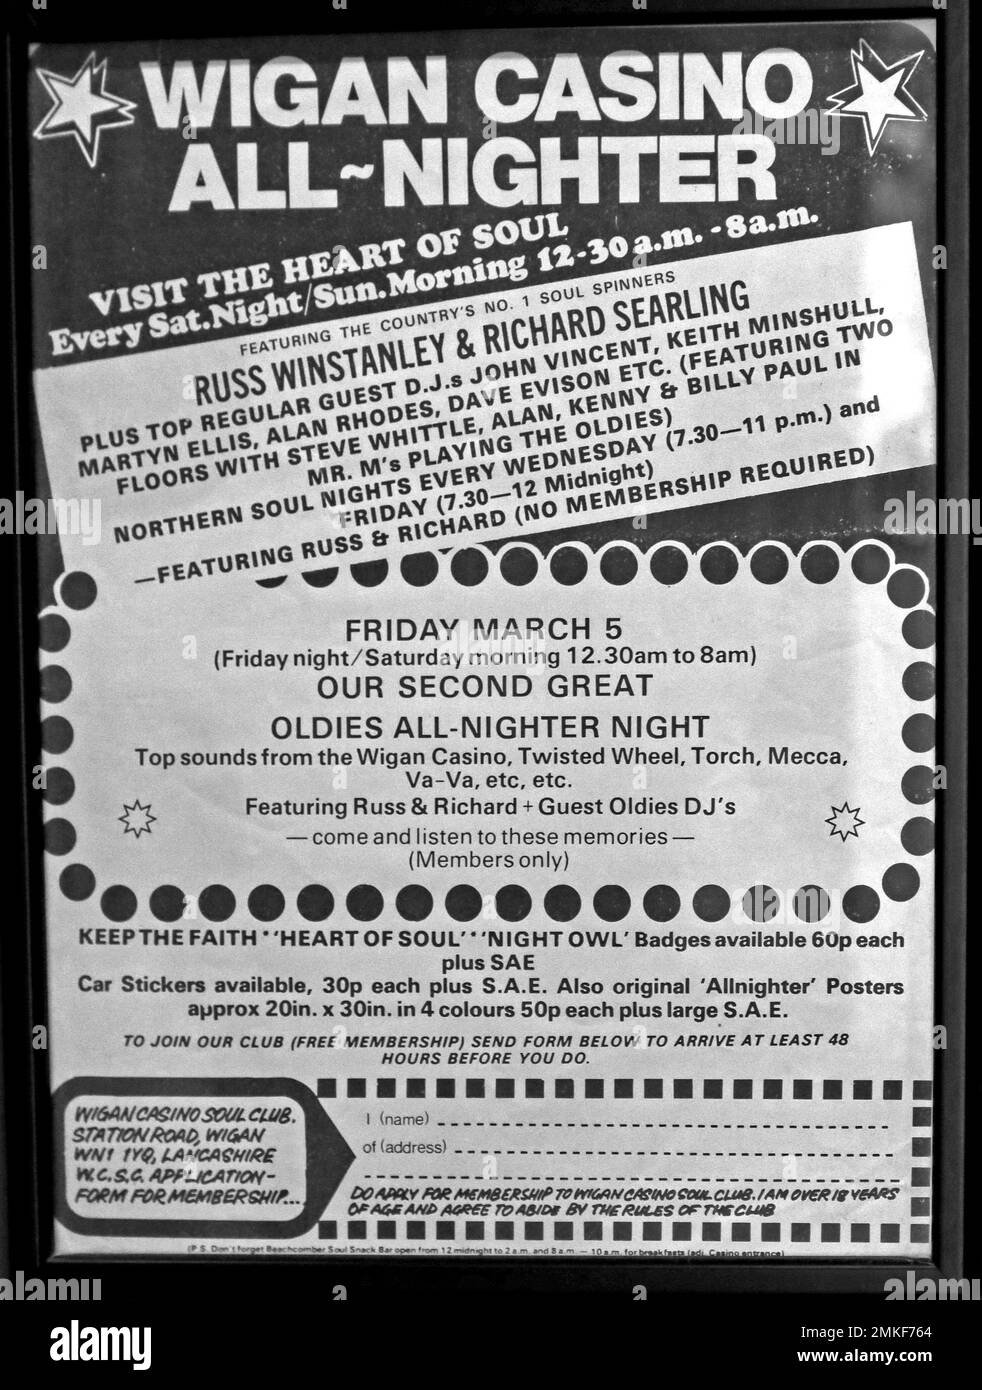 Wigan Casino Poster, All-Nighter, Visit the Heart of Soul 12:30-8am, mit Soul Spinners Russ Winstanley & Richard Sterling, Station Road, Wigan Stockfoto